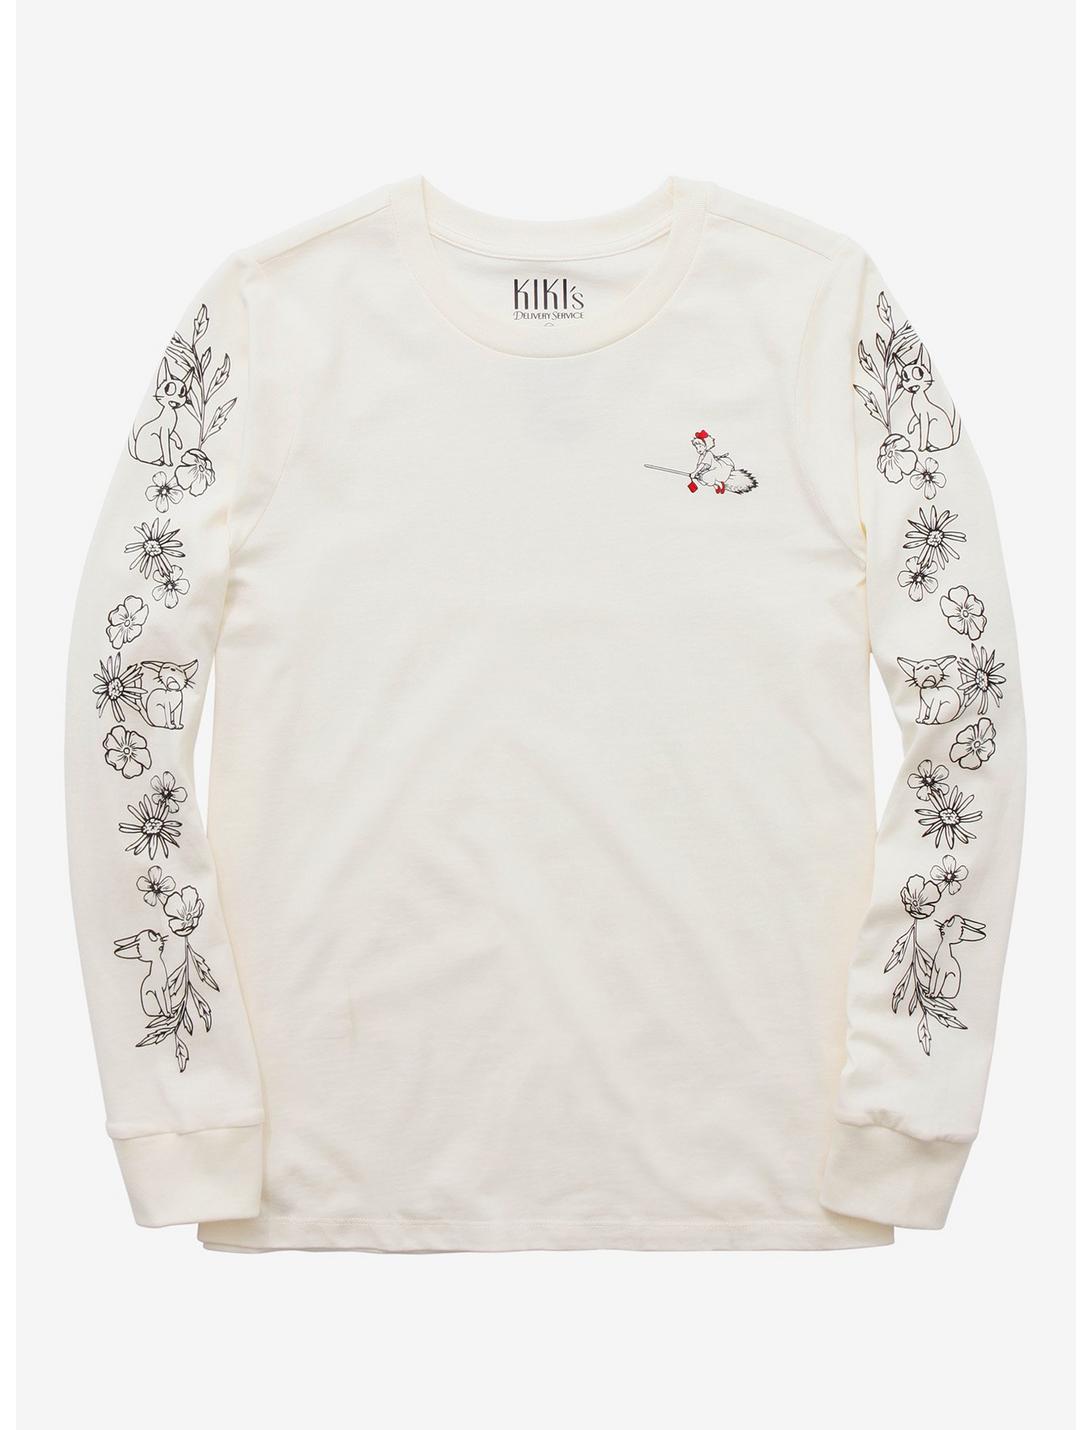 Studio Ghibli Kiki's Delivery Service Floral Long Sleeve T-Shirt - BoxLunch Exclusive, WHITE, hi-res